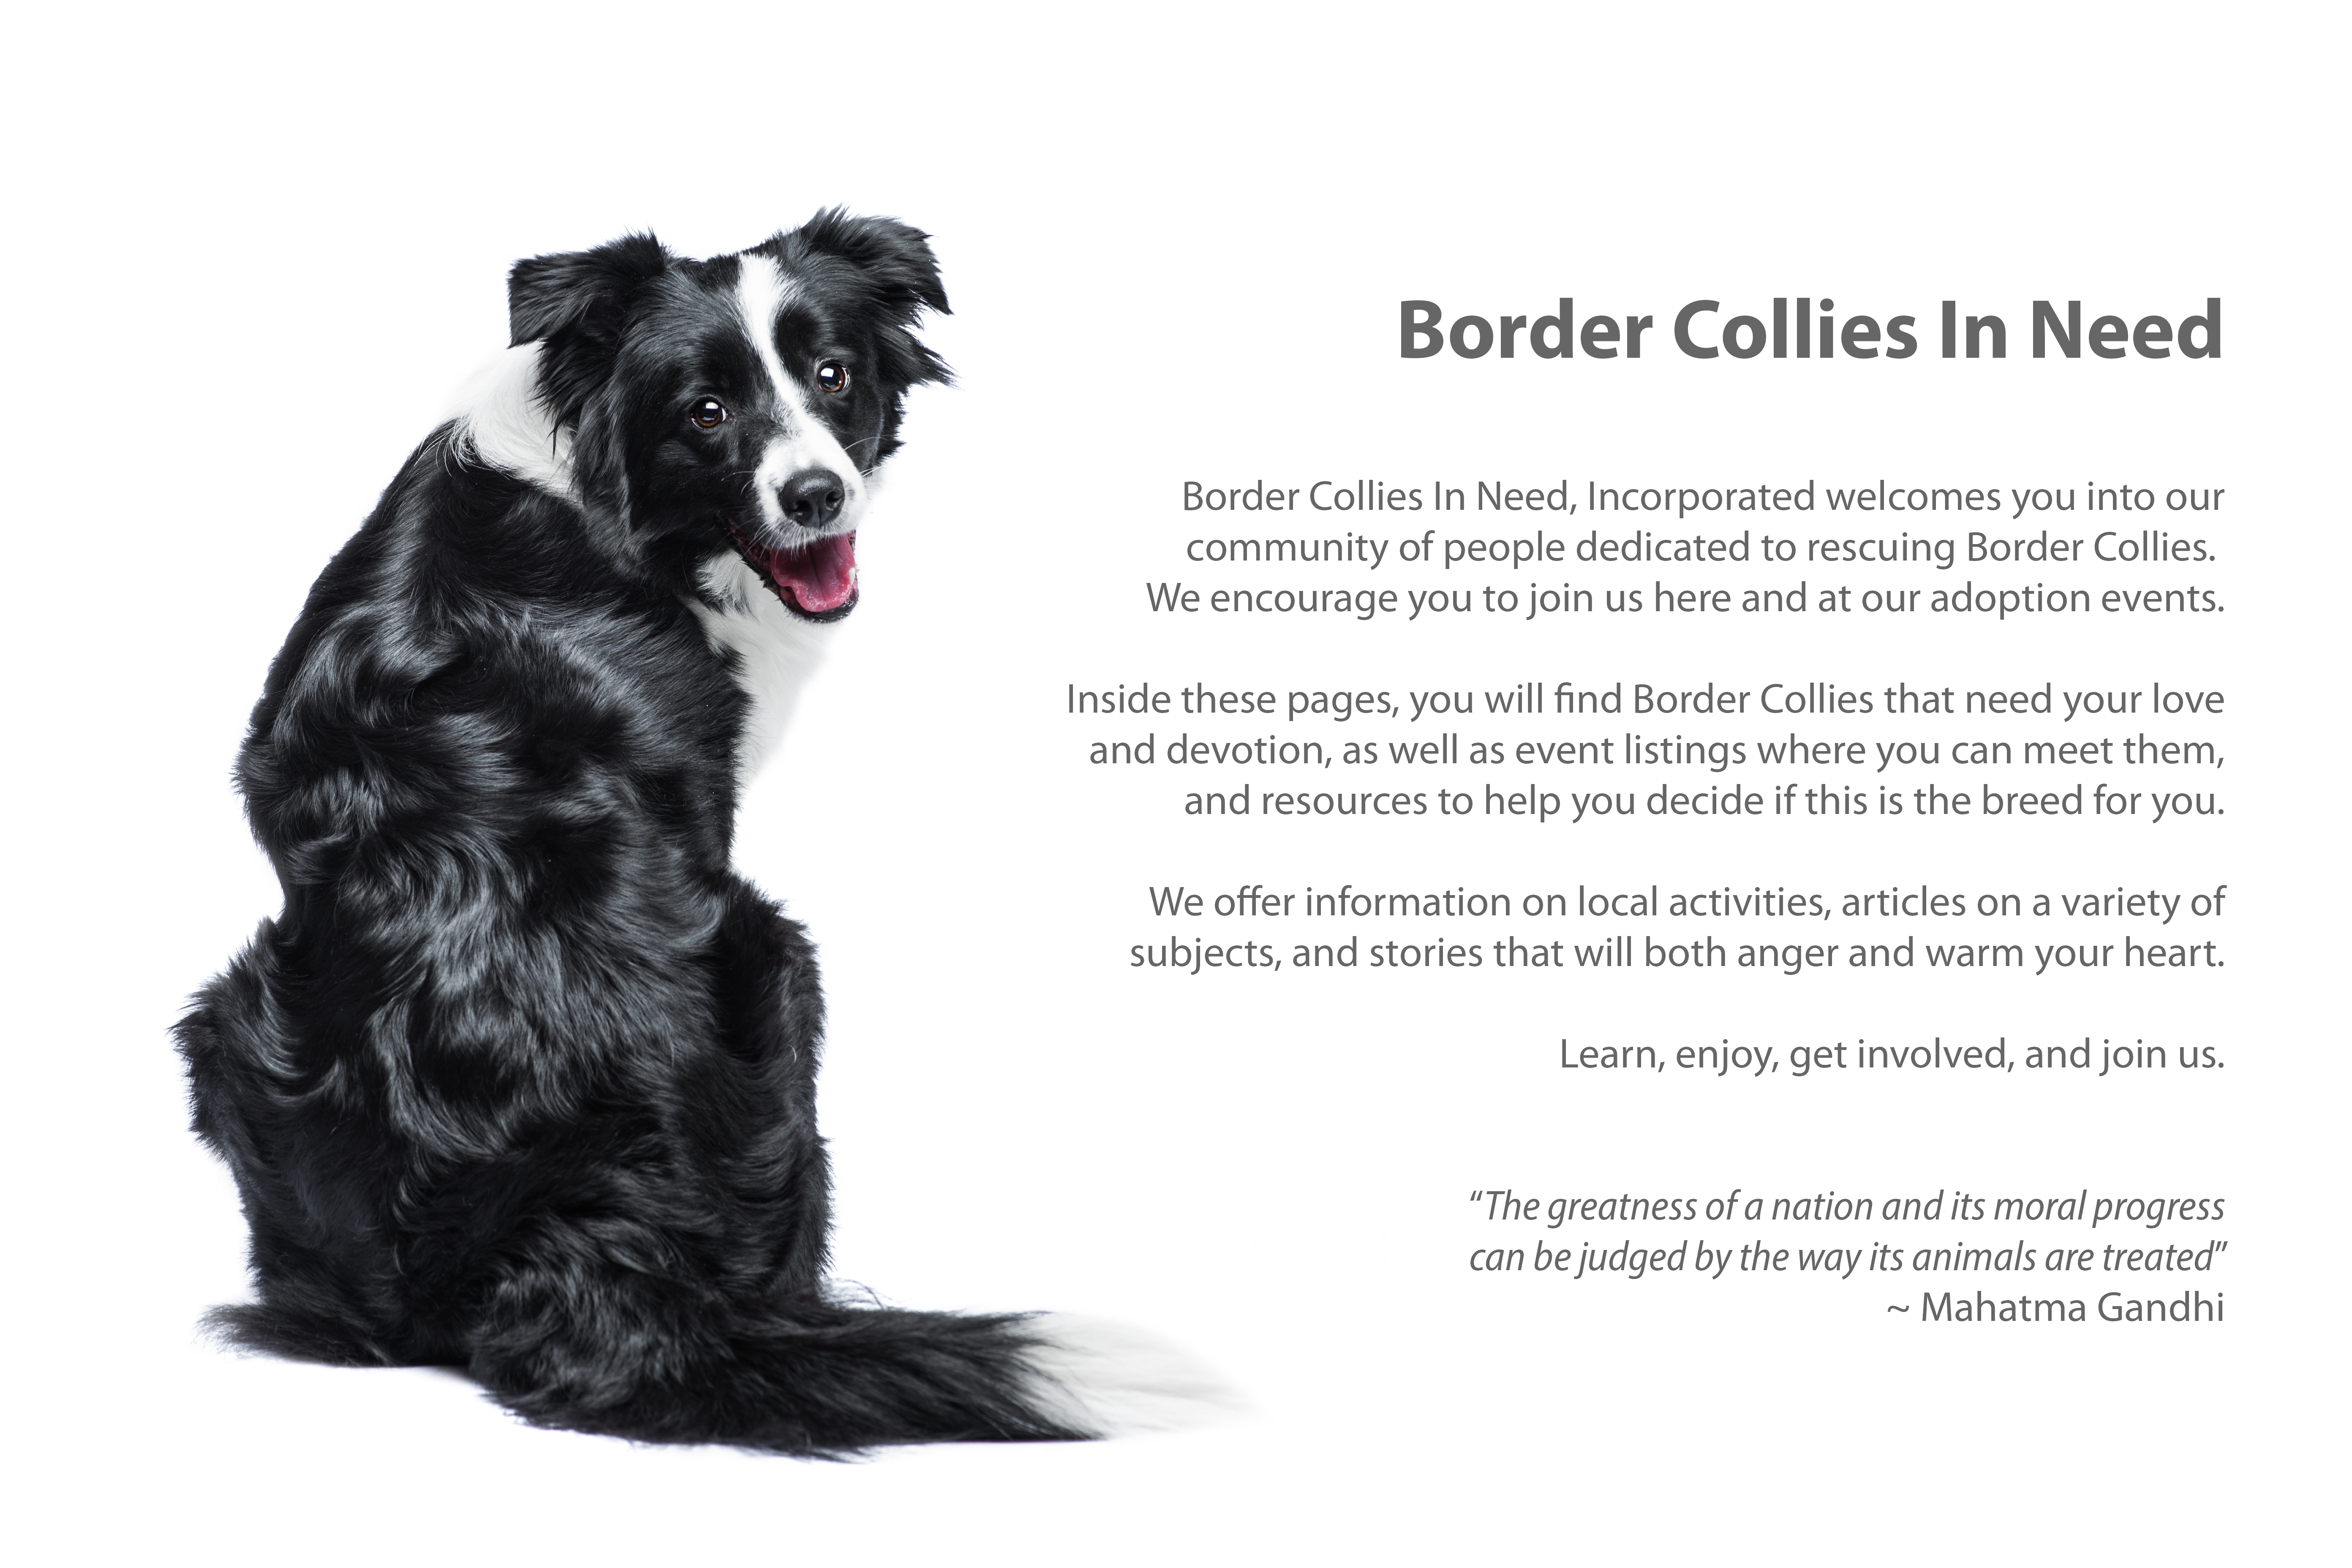 Loving new border looking homes for collies Puppies for